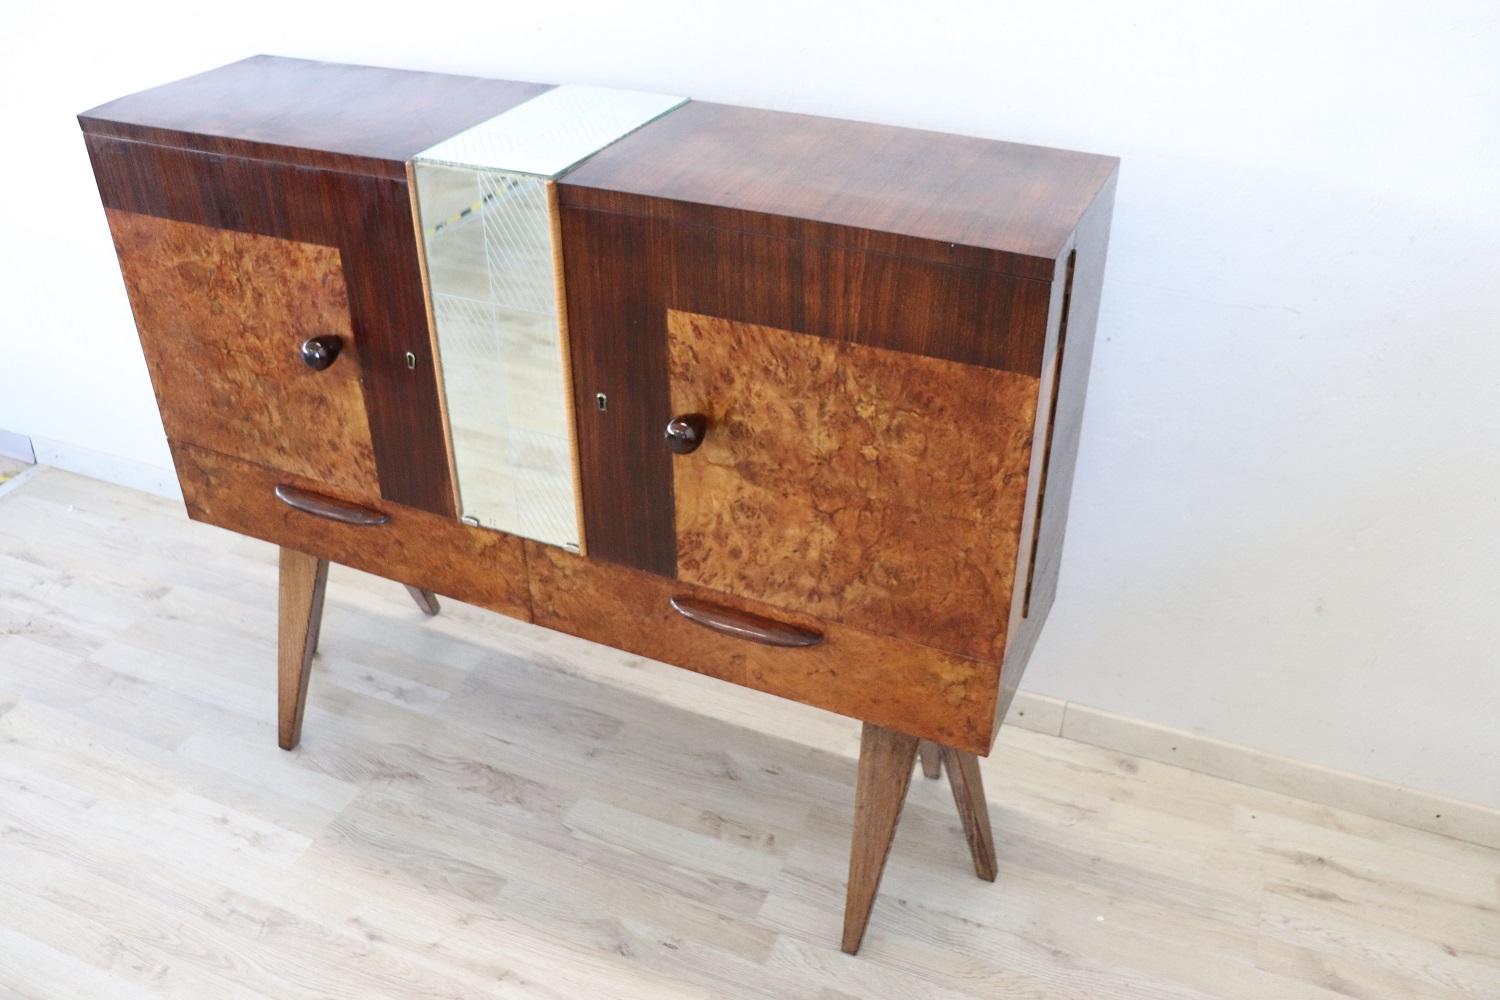 Beautiful and rare Italian design bar cabinet 1960s. Made of fine birch burl and rosewood. Equipped in the lower part with two comfortable drawers. Internally equipped with a mirror on the bottom to better see your bottles. Perfect for a modern